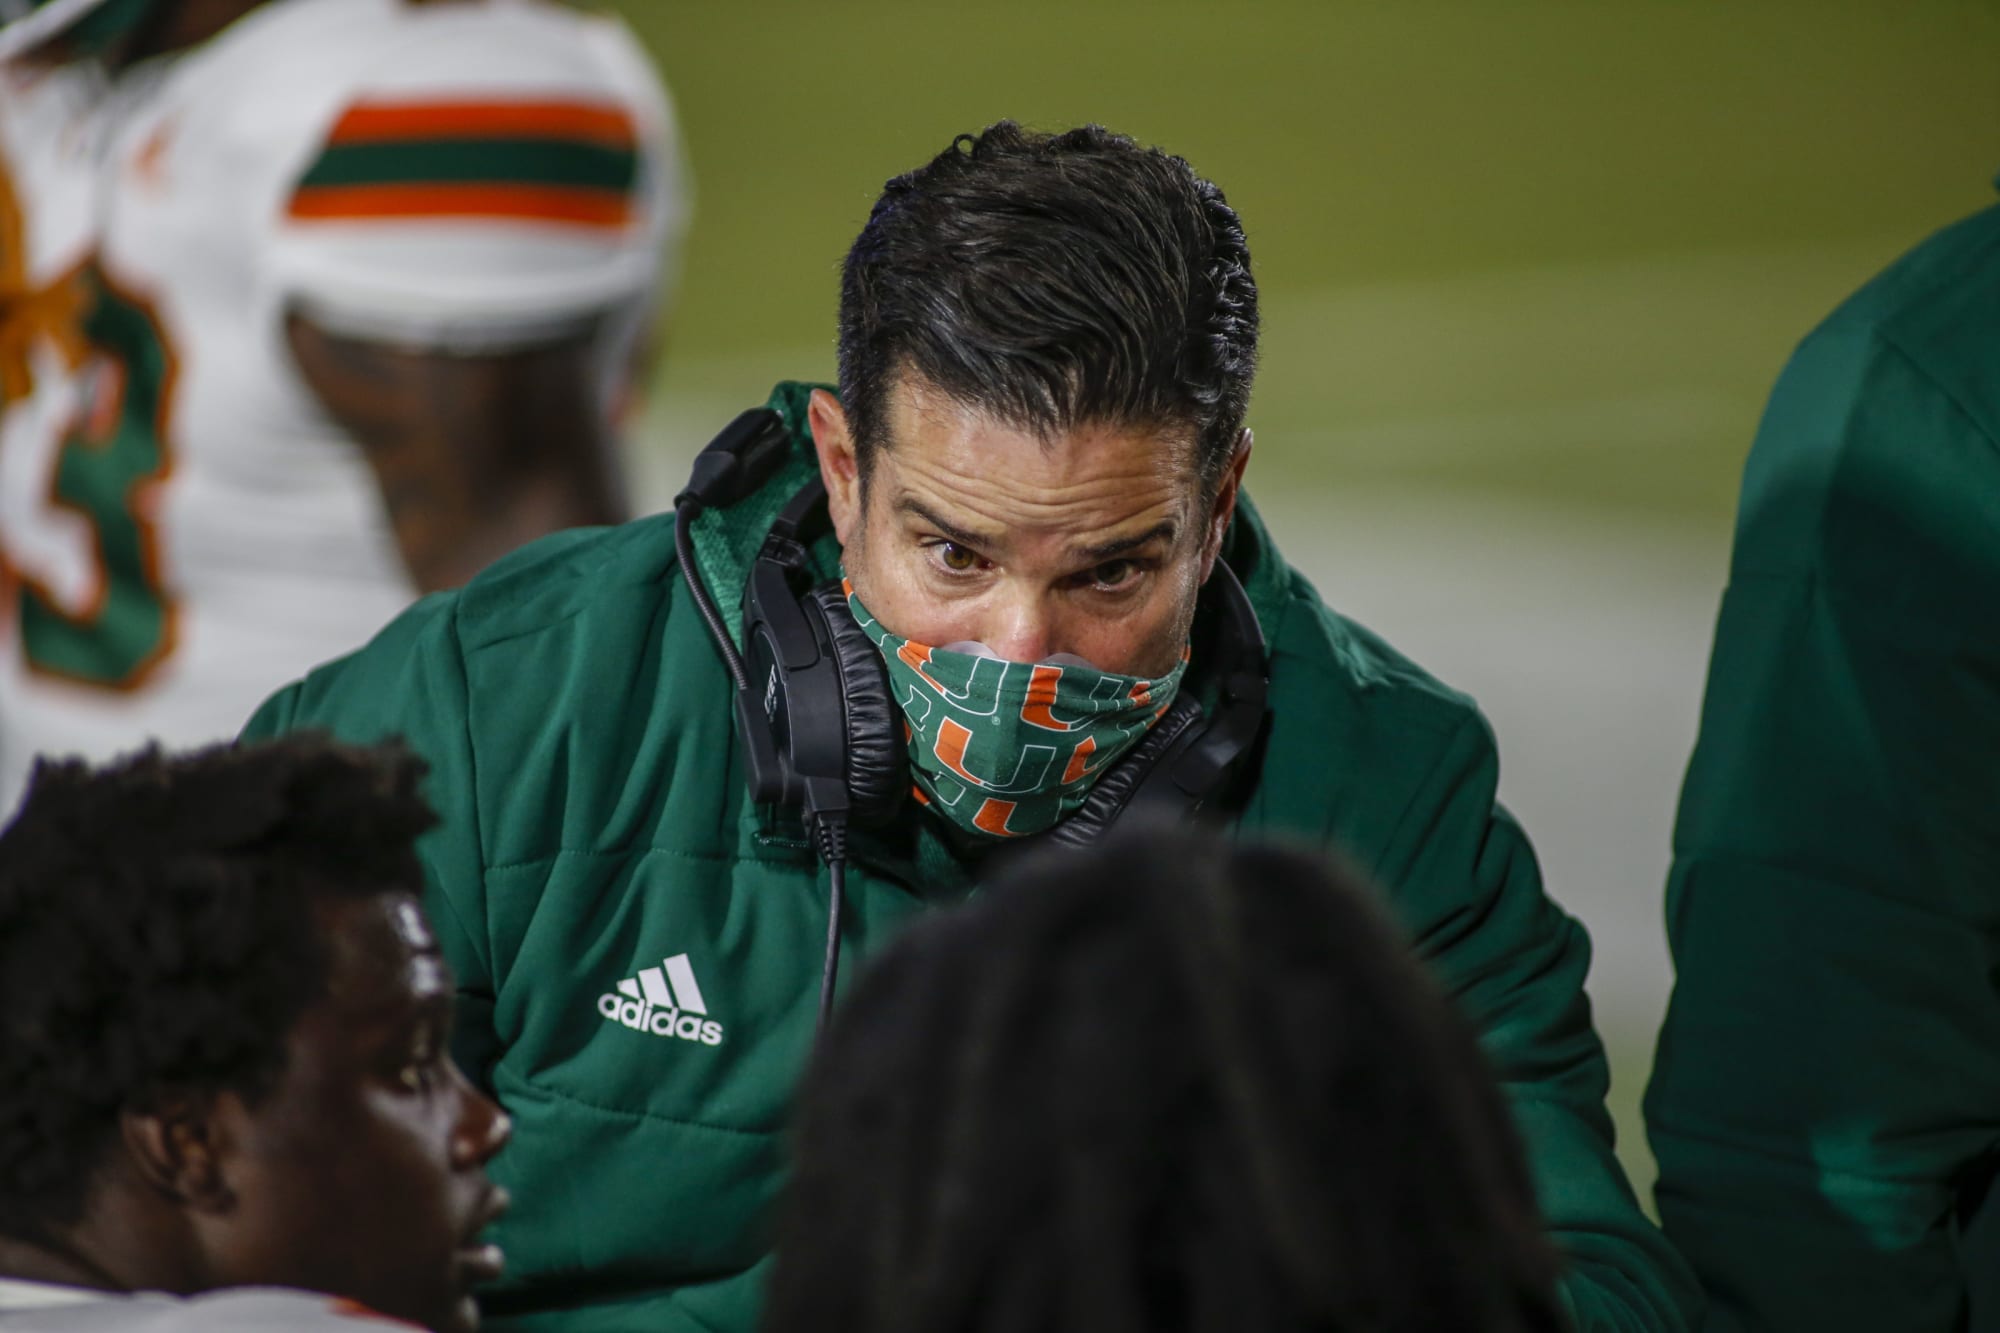 FSU football: Manny Diaz feeling the pressure from the Noles? - Chop Chat